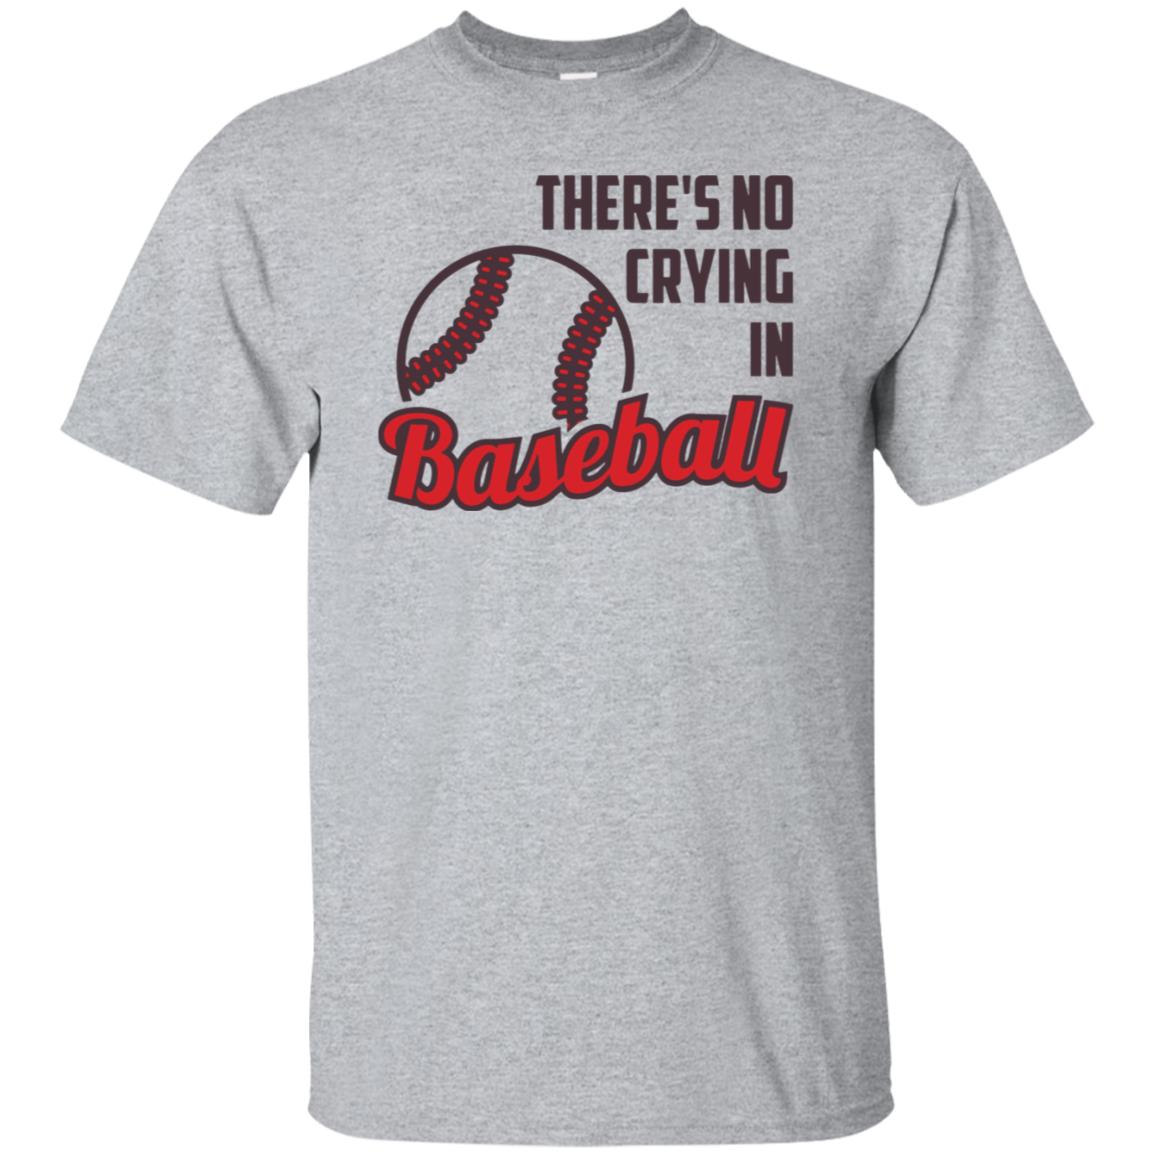 There Is No Crying In Baseball Shirt - 10% Off - FavorMerch